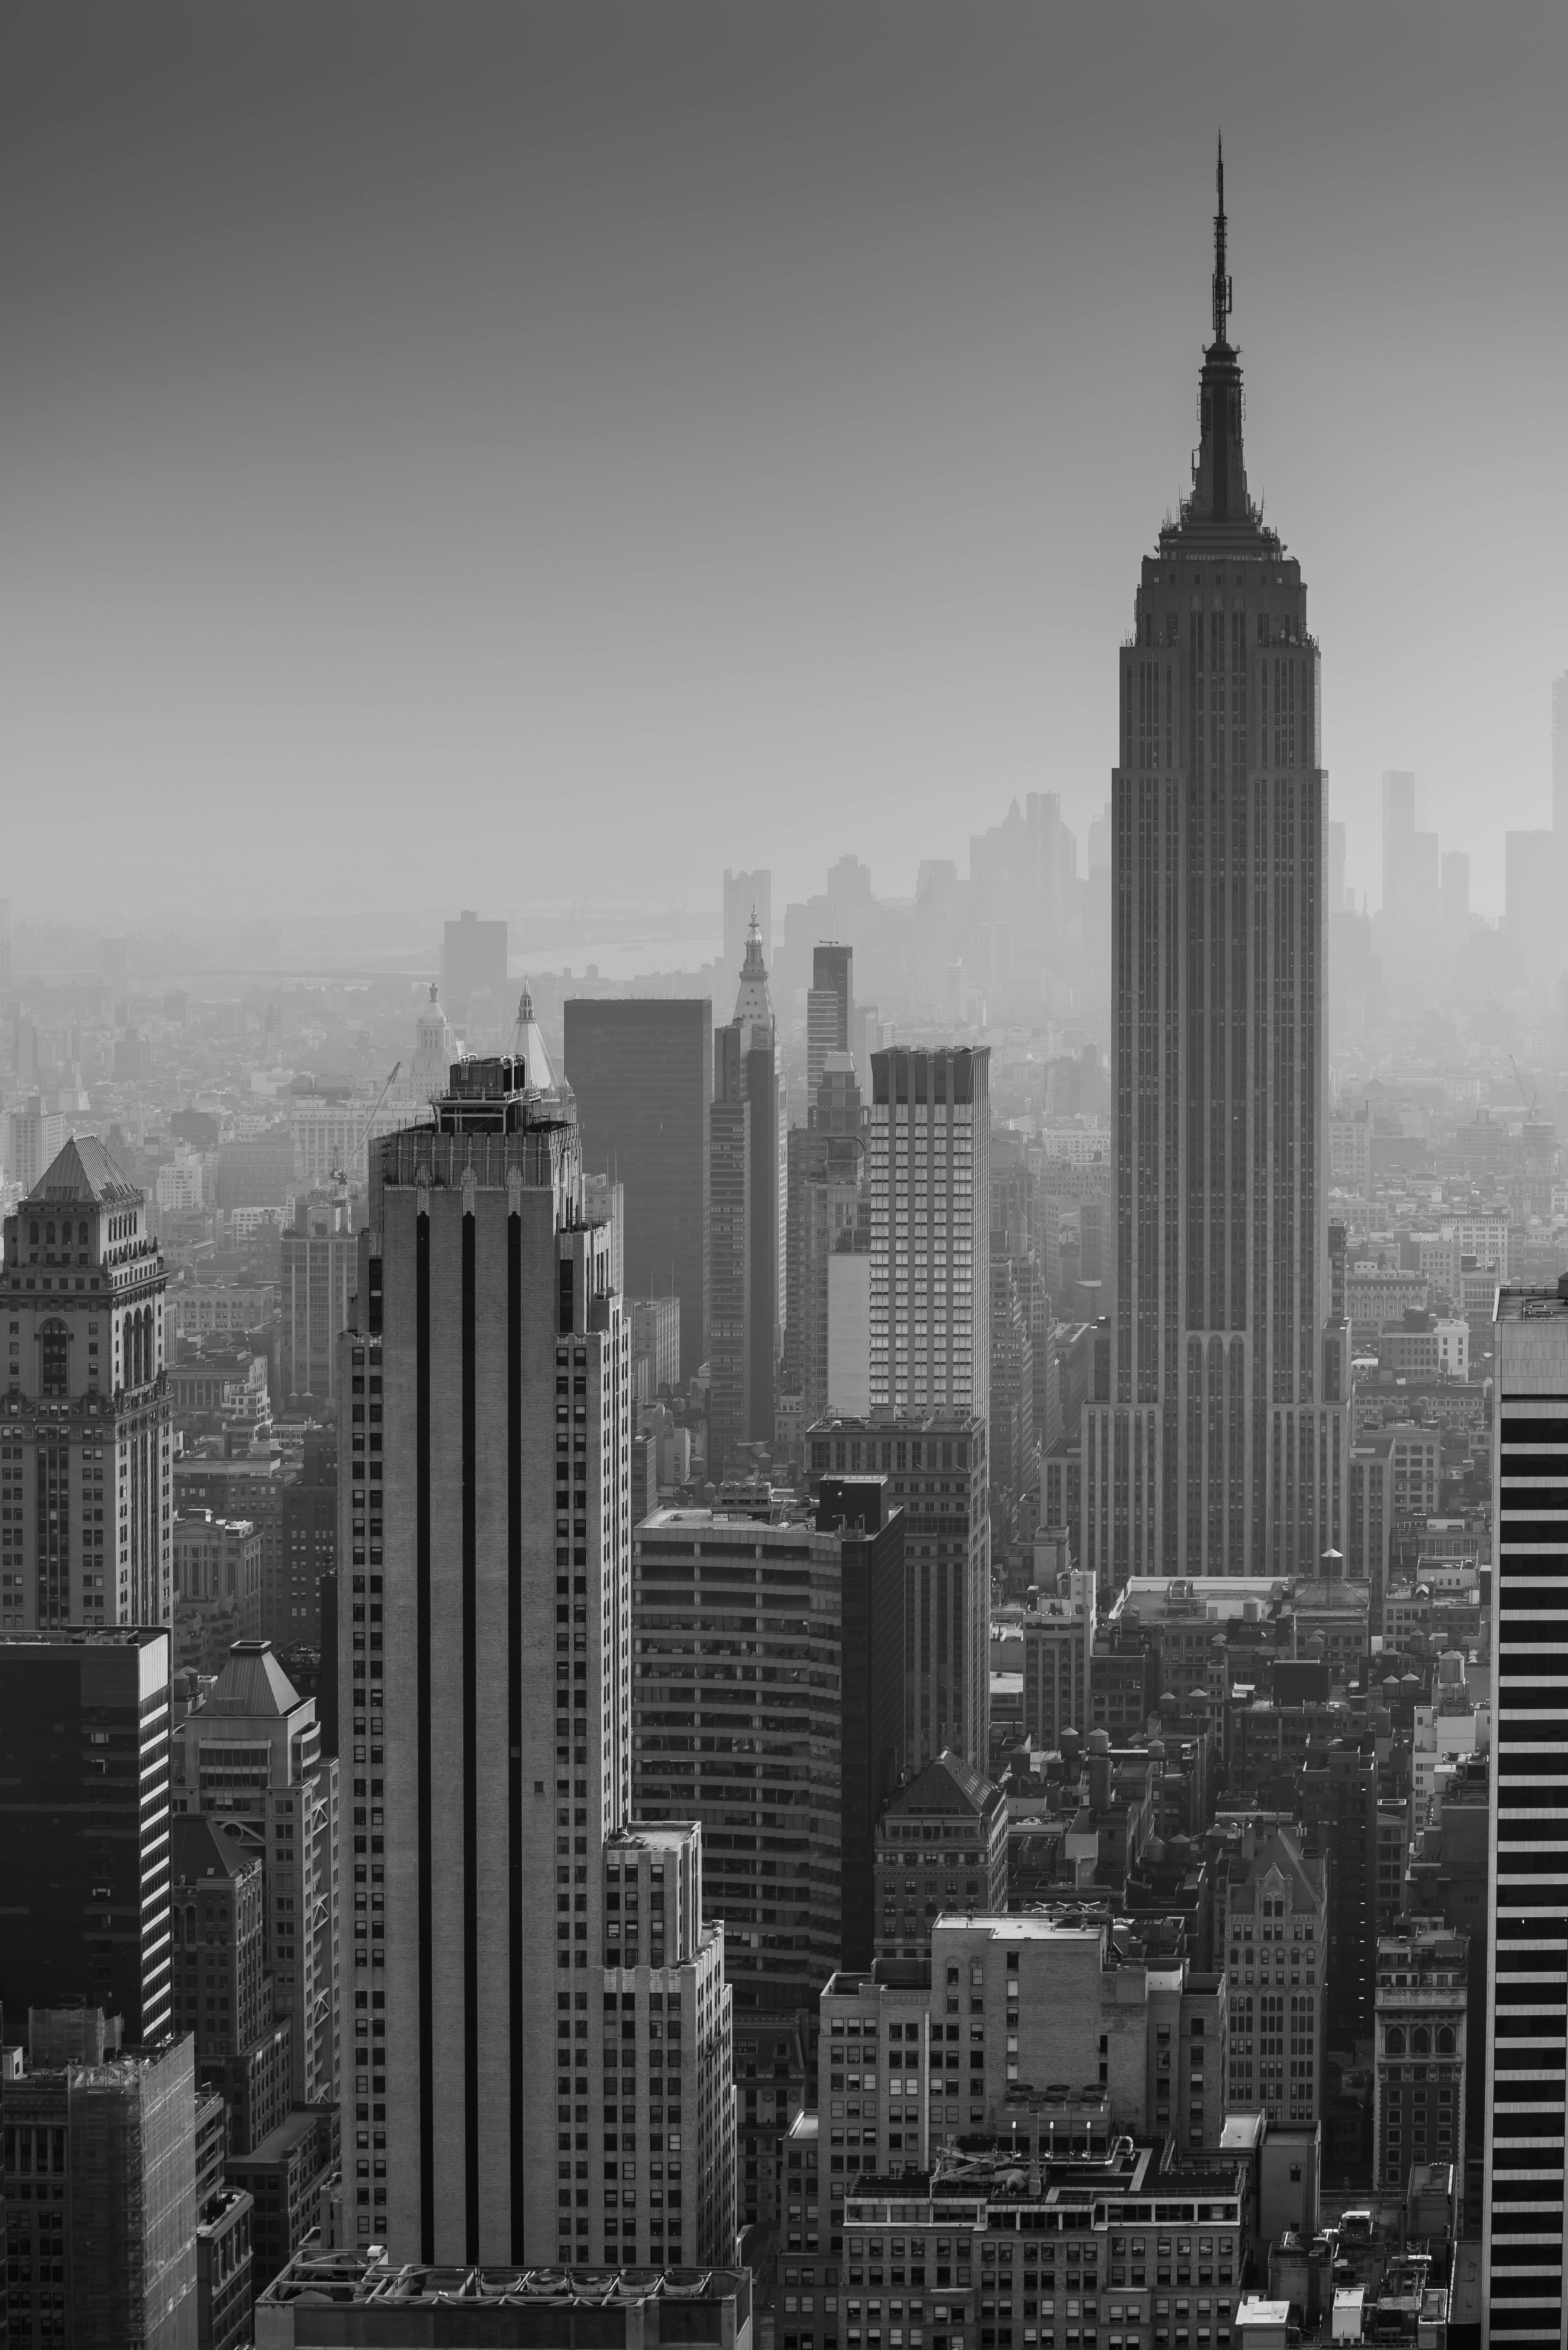 city, bw, chb, skyscrapers, architecture, cities, building, view from above, new york